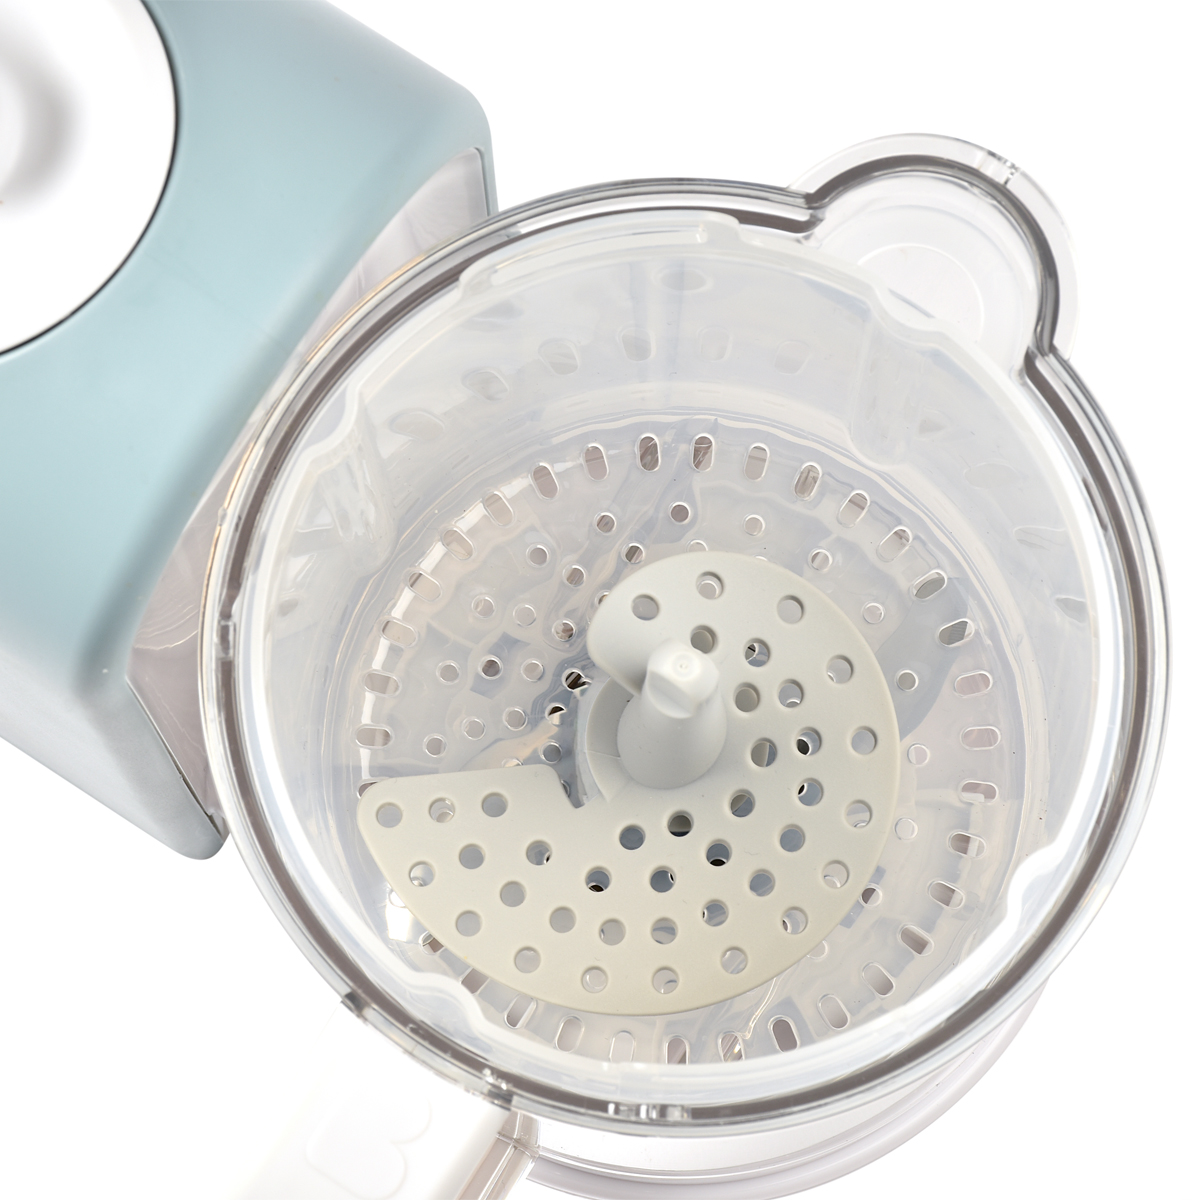 babycook express baby food maker in baltic blue